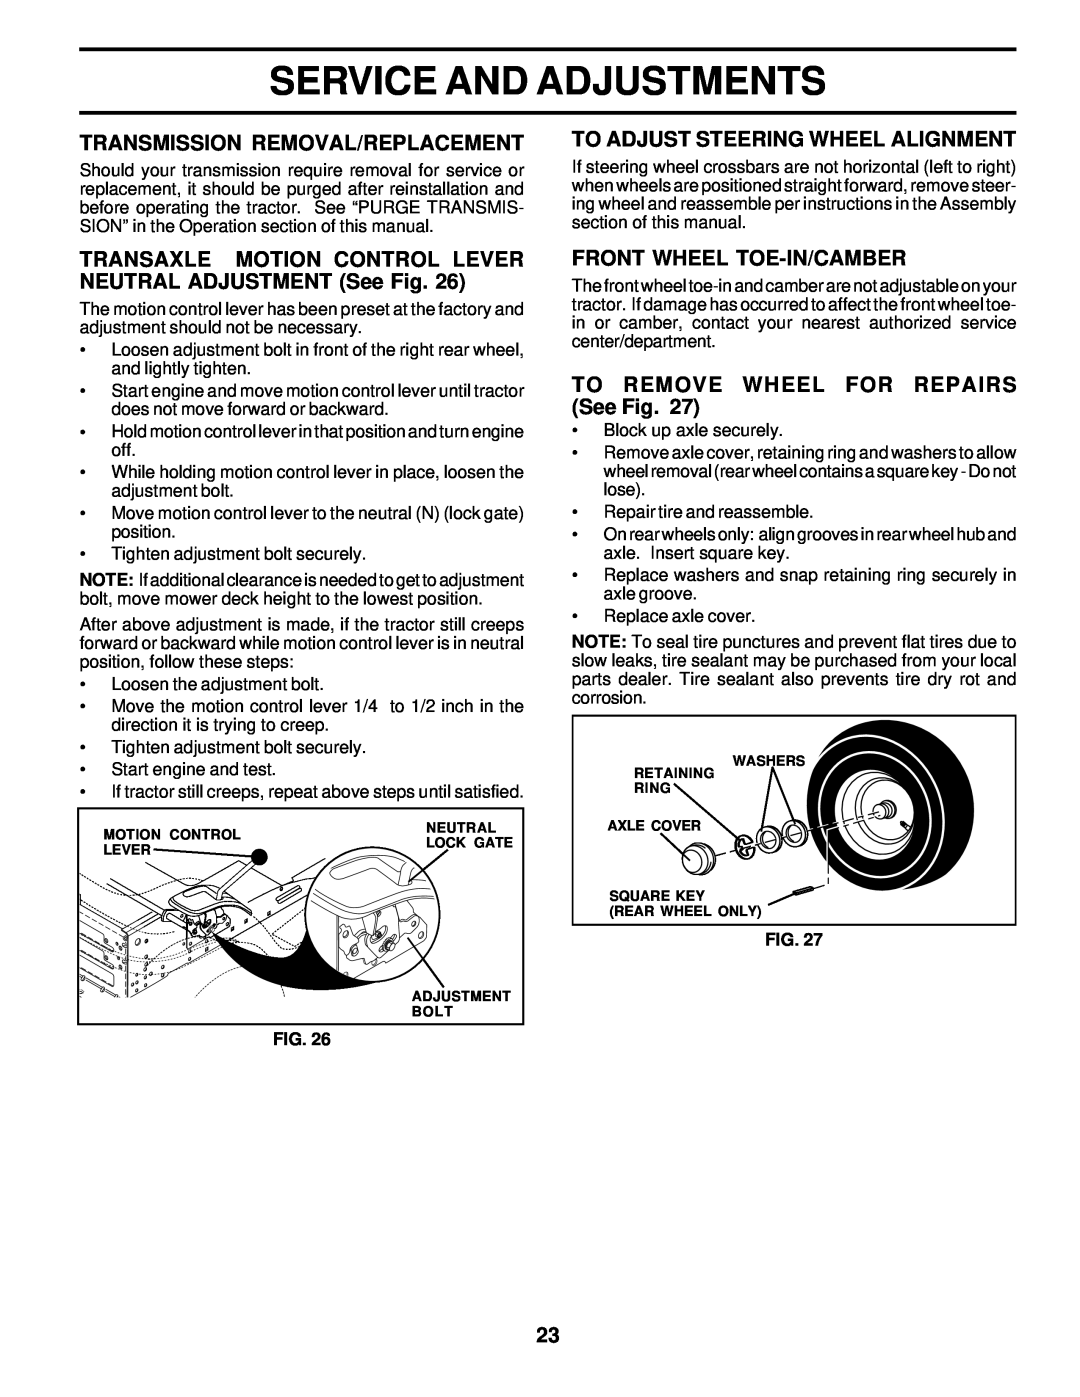 Poulan 178087 owner manual Transmission Removal/Replacement, TRANSAXLE MOTION CONTROL LEVER NEUTRAL ADJUSTMENT See Fig 